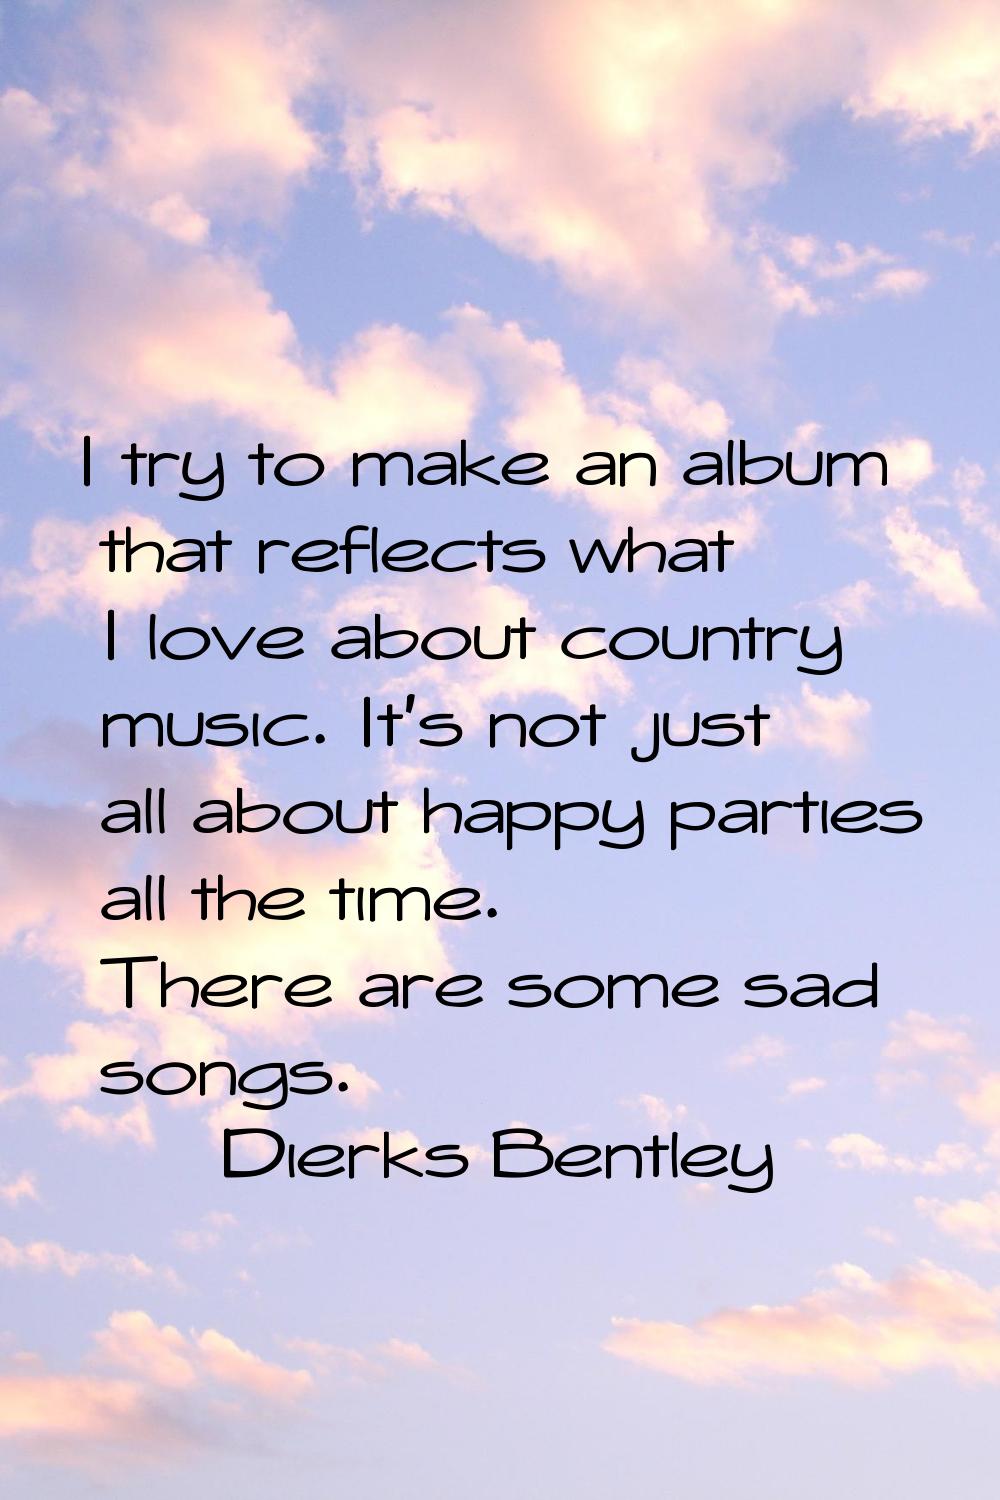 I try to make an album that reflects what I love about country music. It's not just all about happy